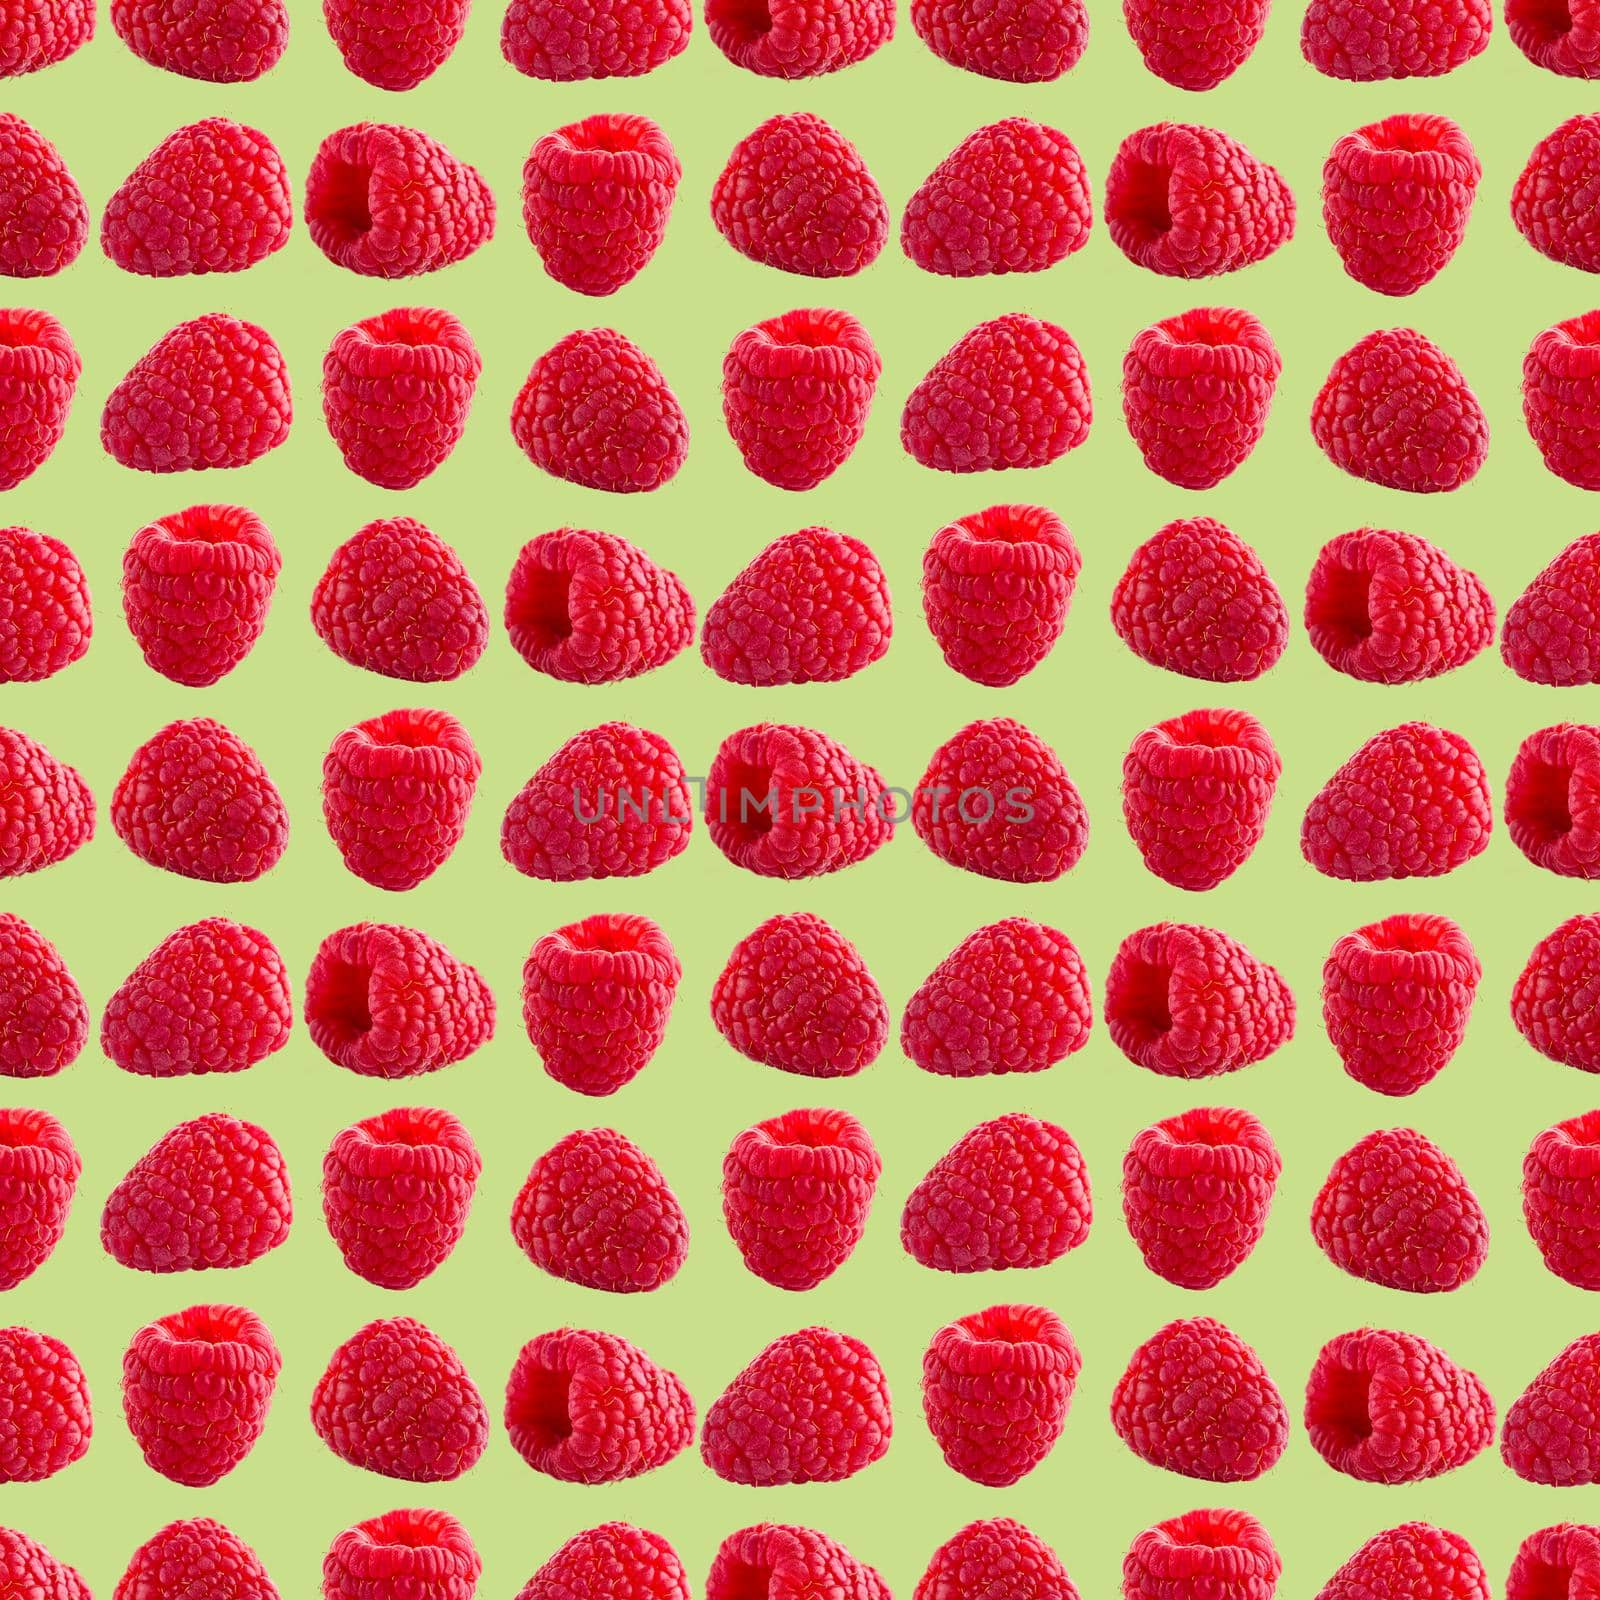 Seamless pattern with ripe raspberry. Berries abstract background. Raspberry pattern for package design with green background.